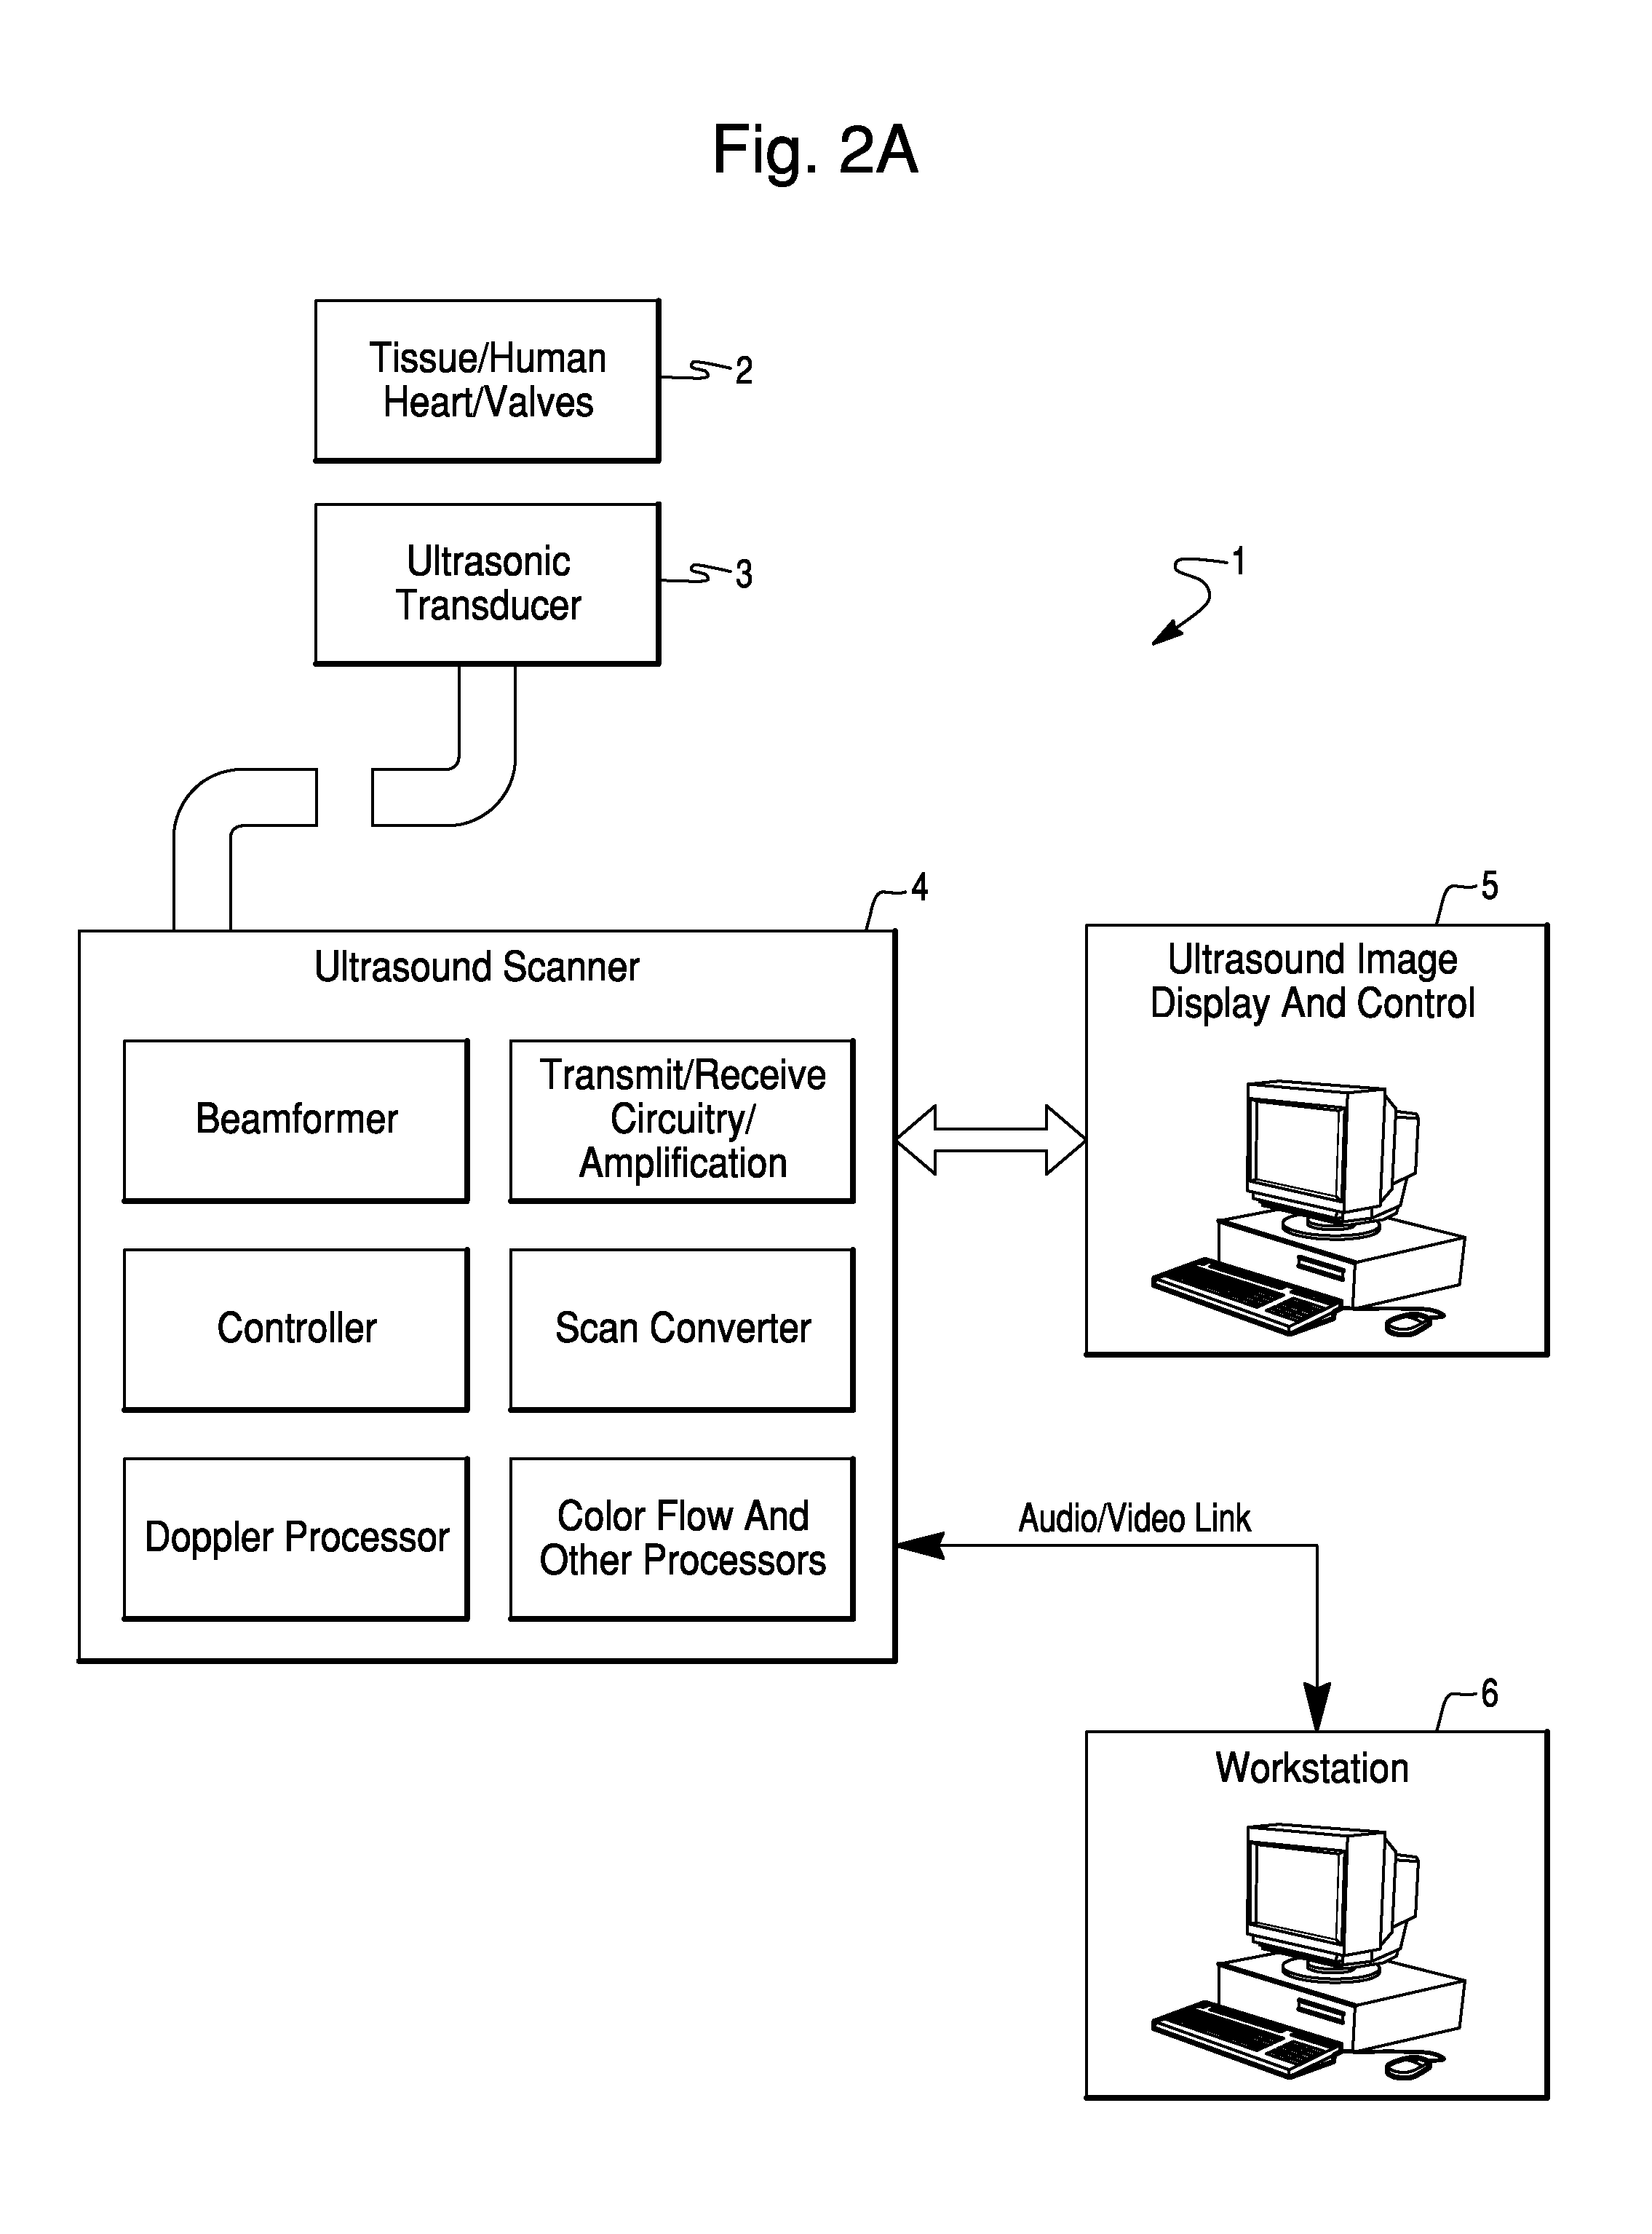 Method and System For Estimating Cardiac Ejection Volume Using Ultrasound Spectral Doppler Image Data